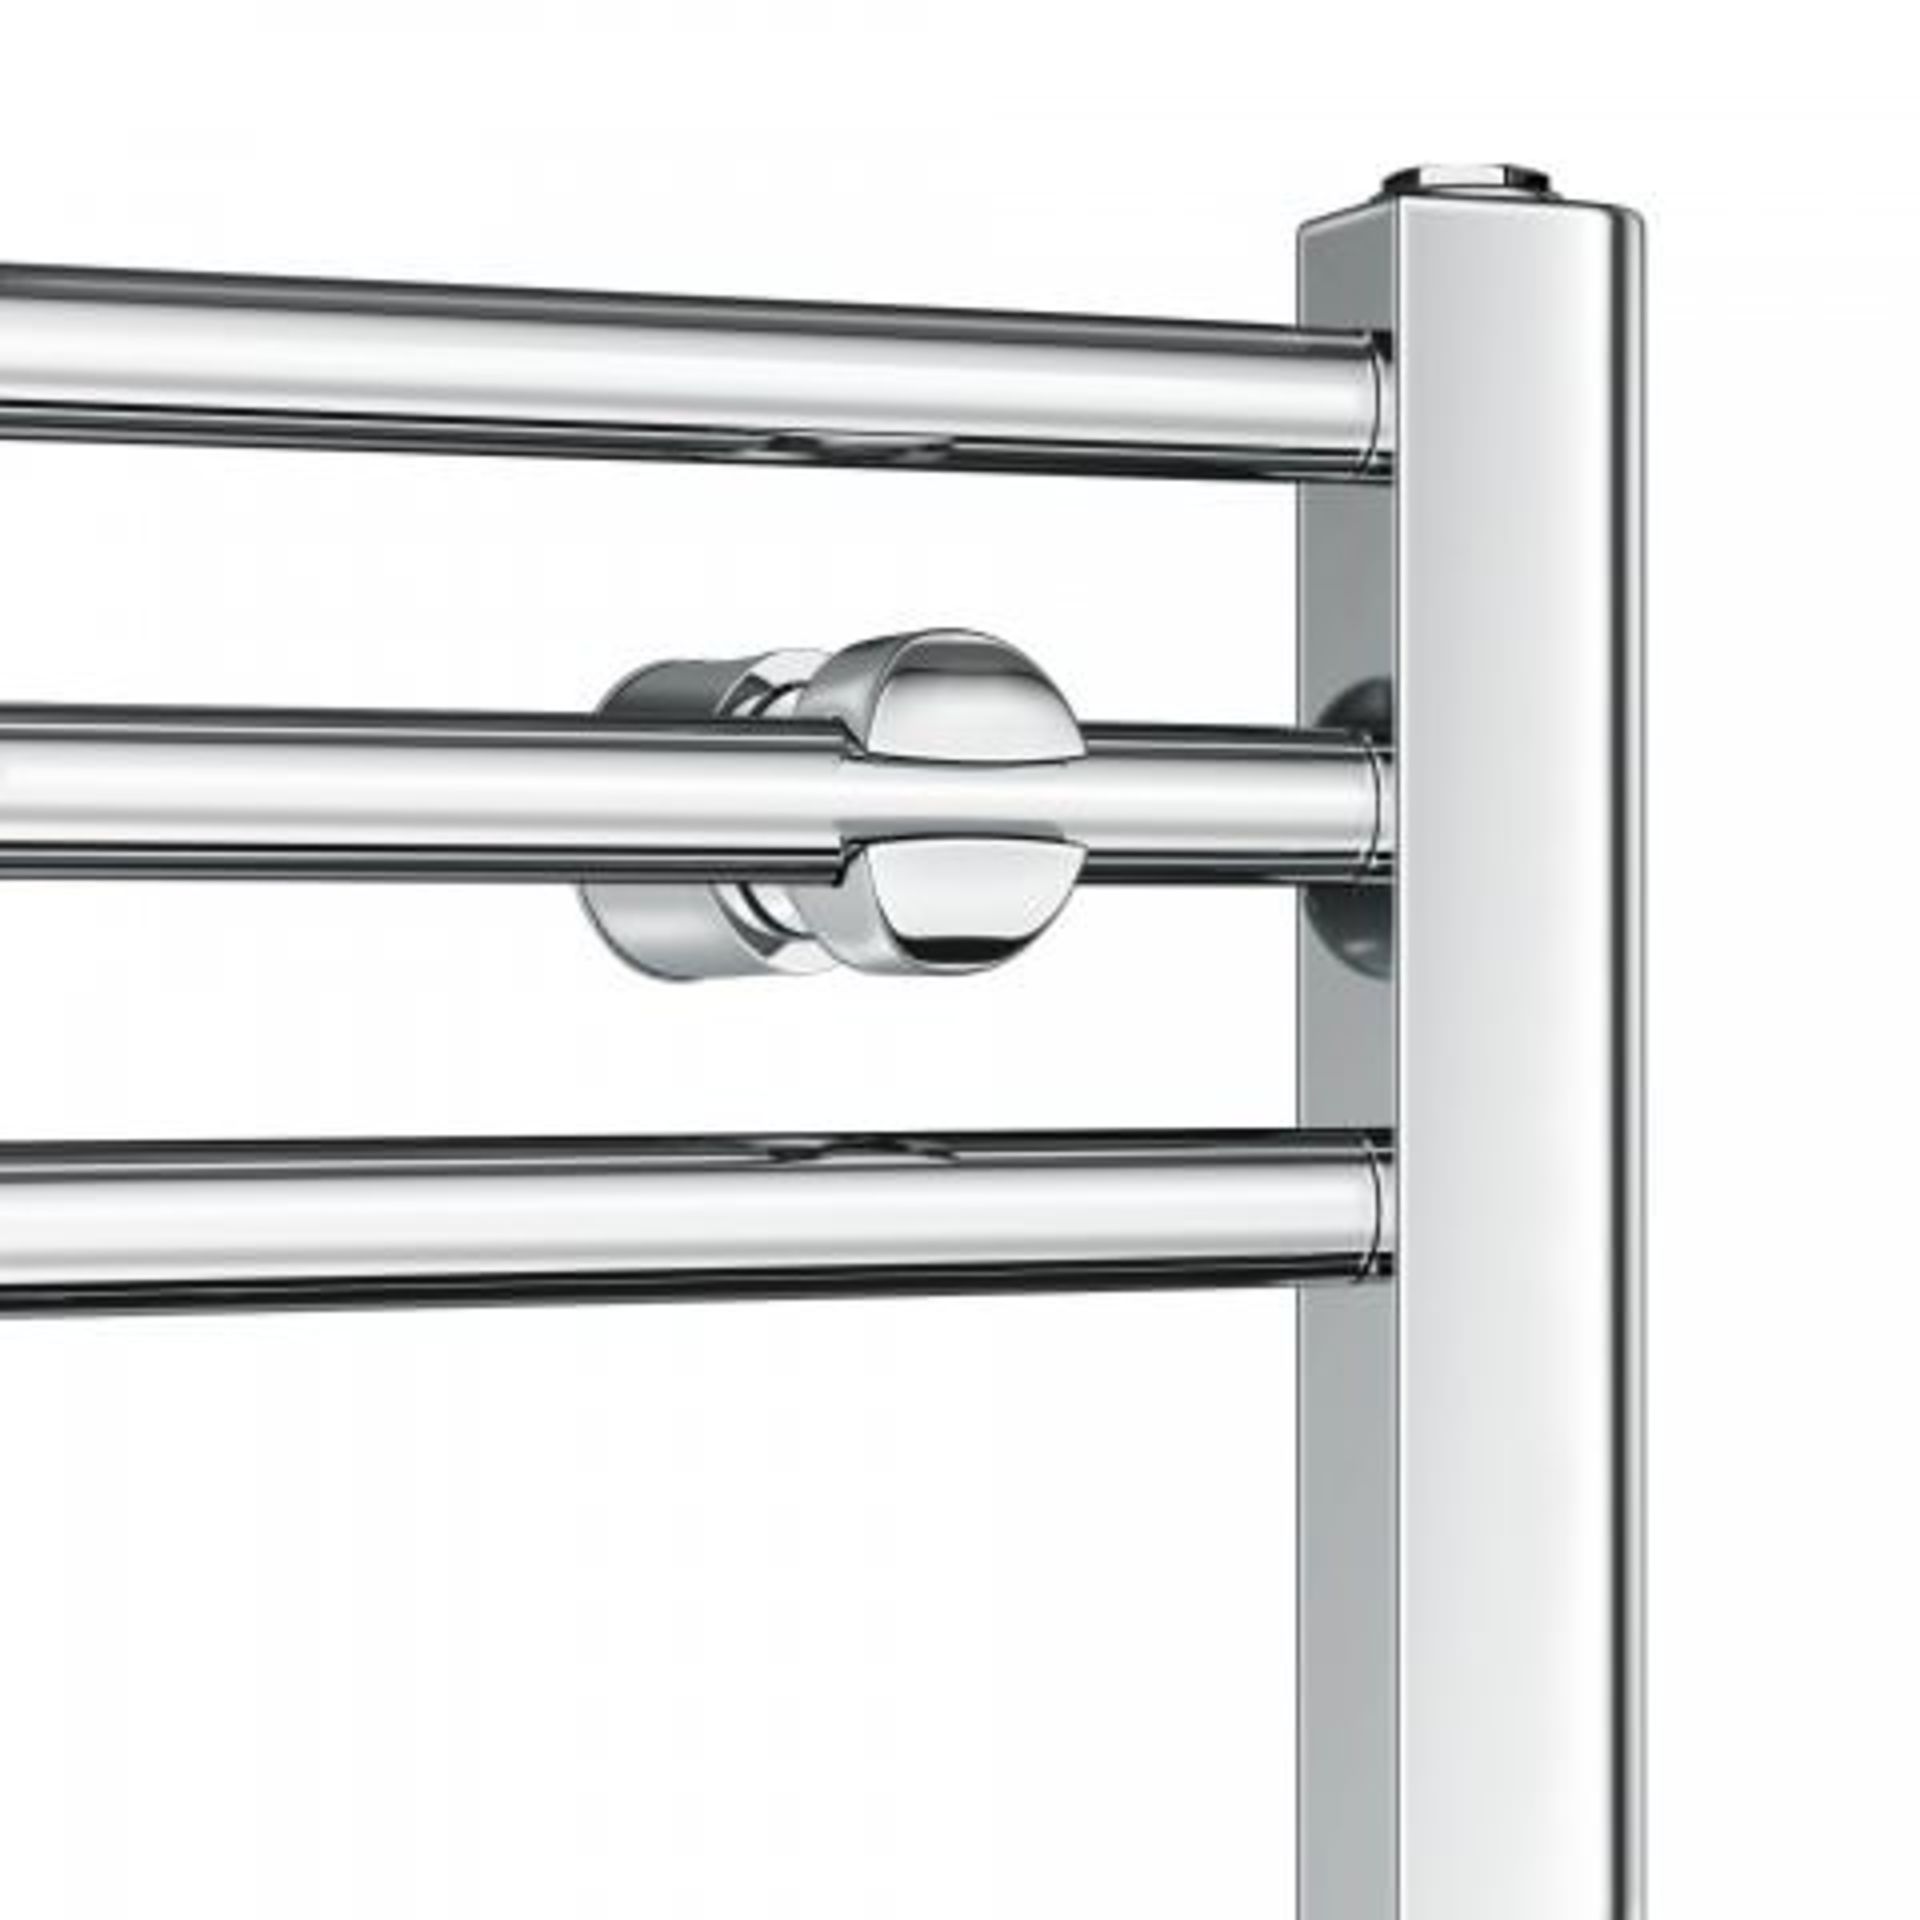 (A18) 1000x400mm - 20mm Tubes - Chrome Heated Straight Rail Ladder Towel Radiator Designer Touch For - Image 4 of 7